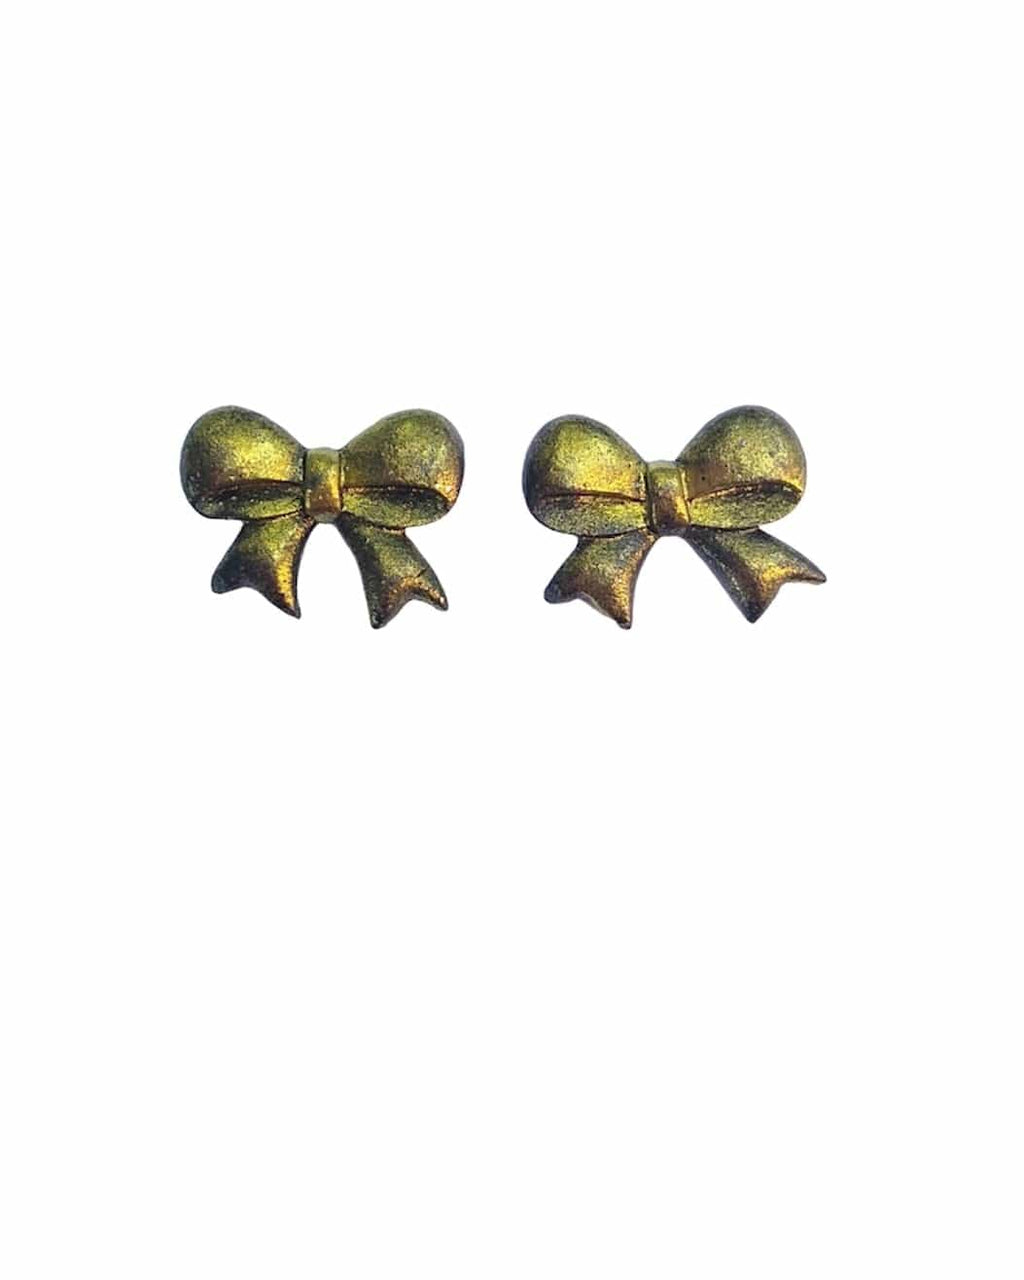 The Gold Bow Handmade Stud Earrings - ADSO Creations